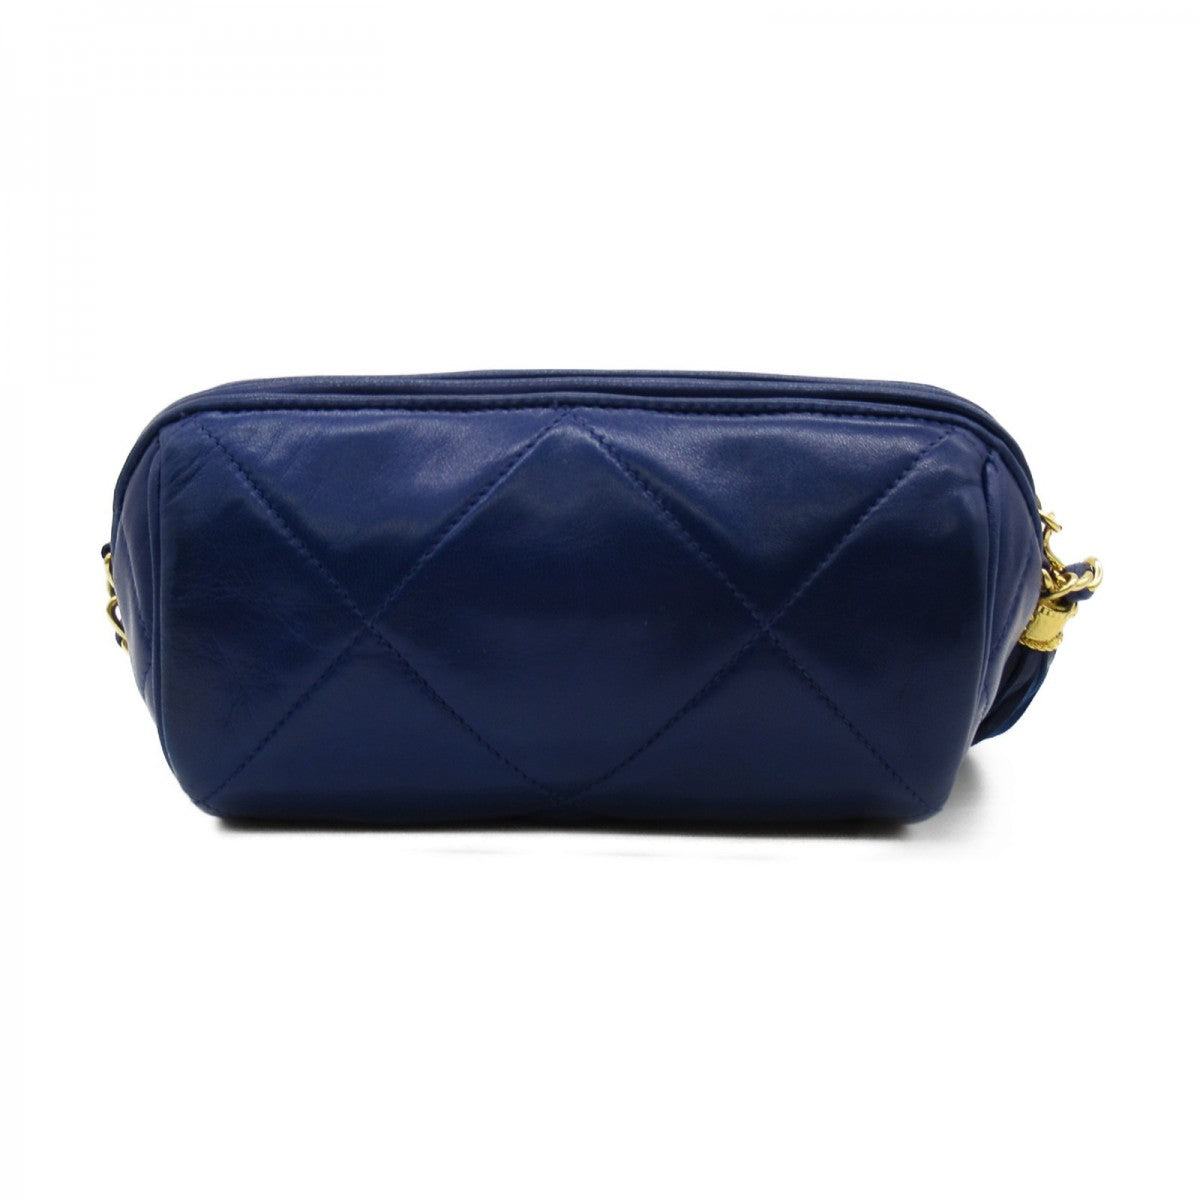 CC Quilted Leather Barrel Bag